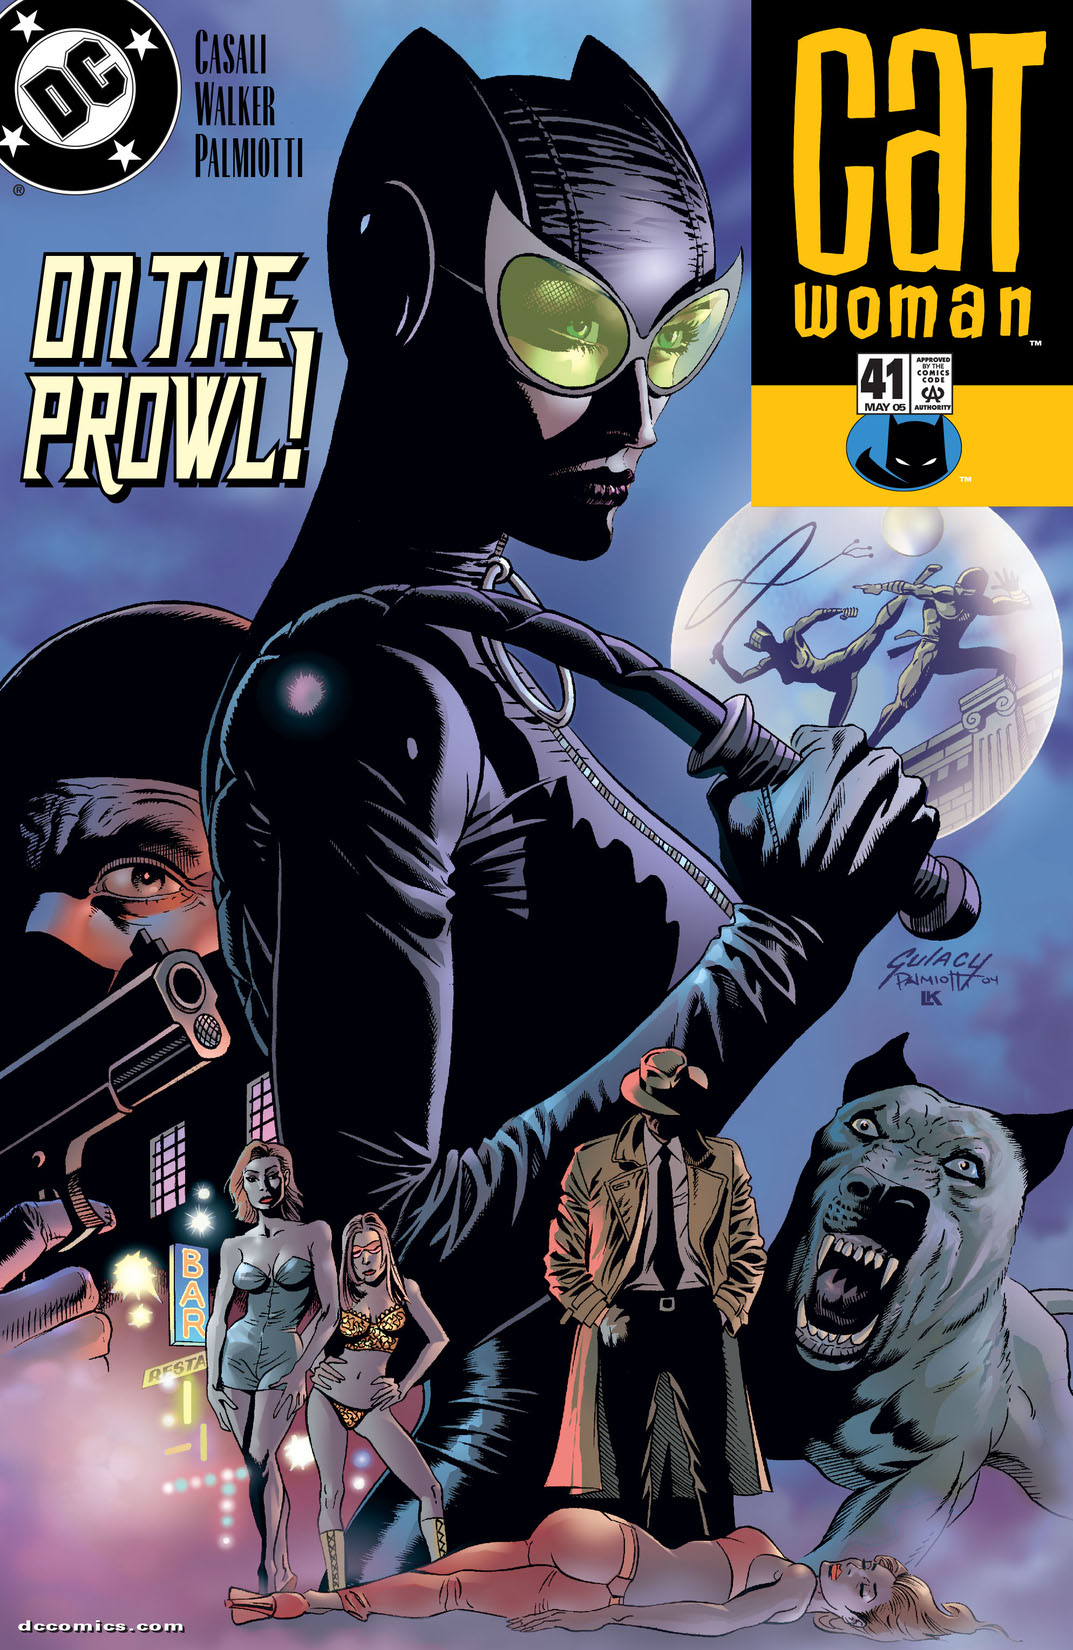 Catwoman (2001-) #41 preview images